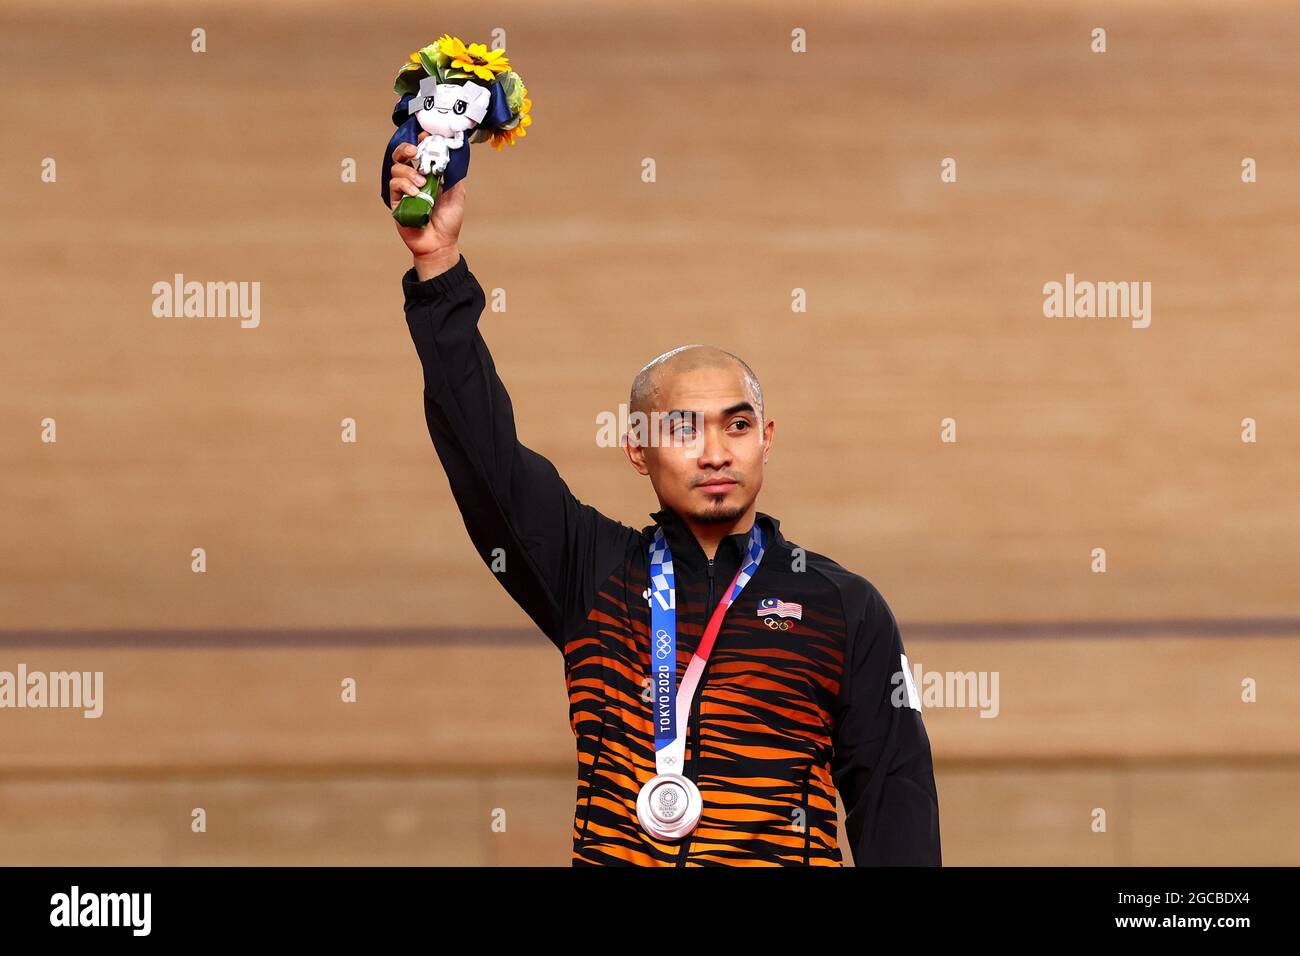 The medals olympics at malaysia Malaysia at